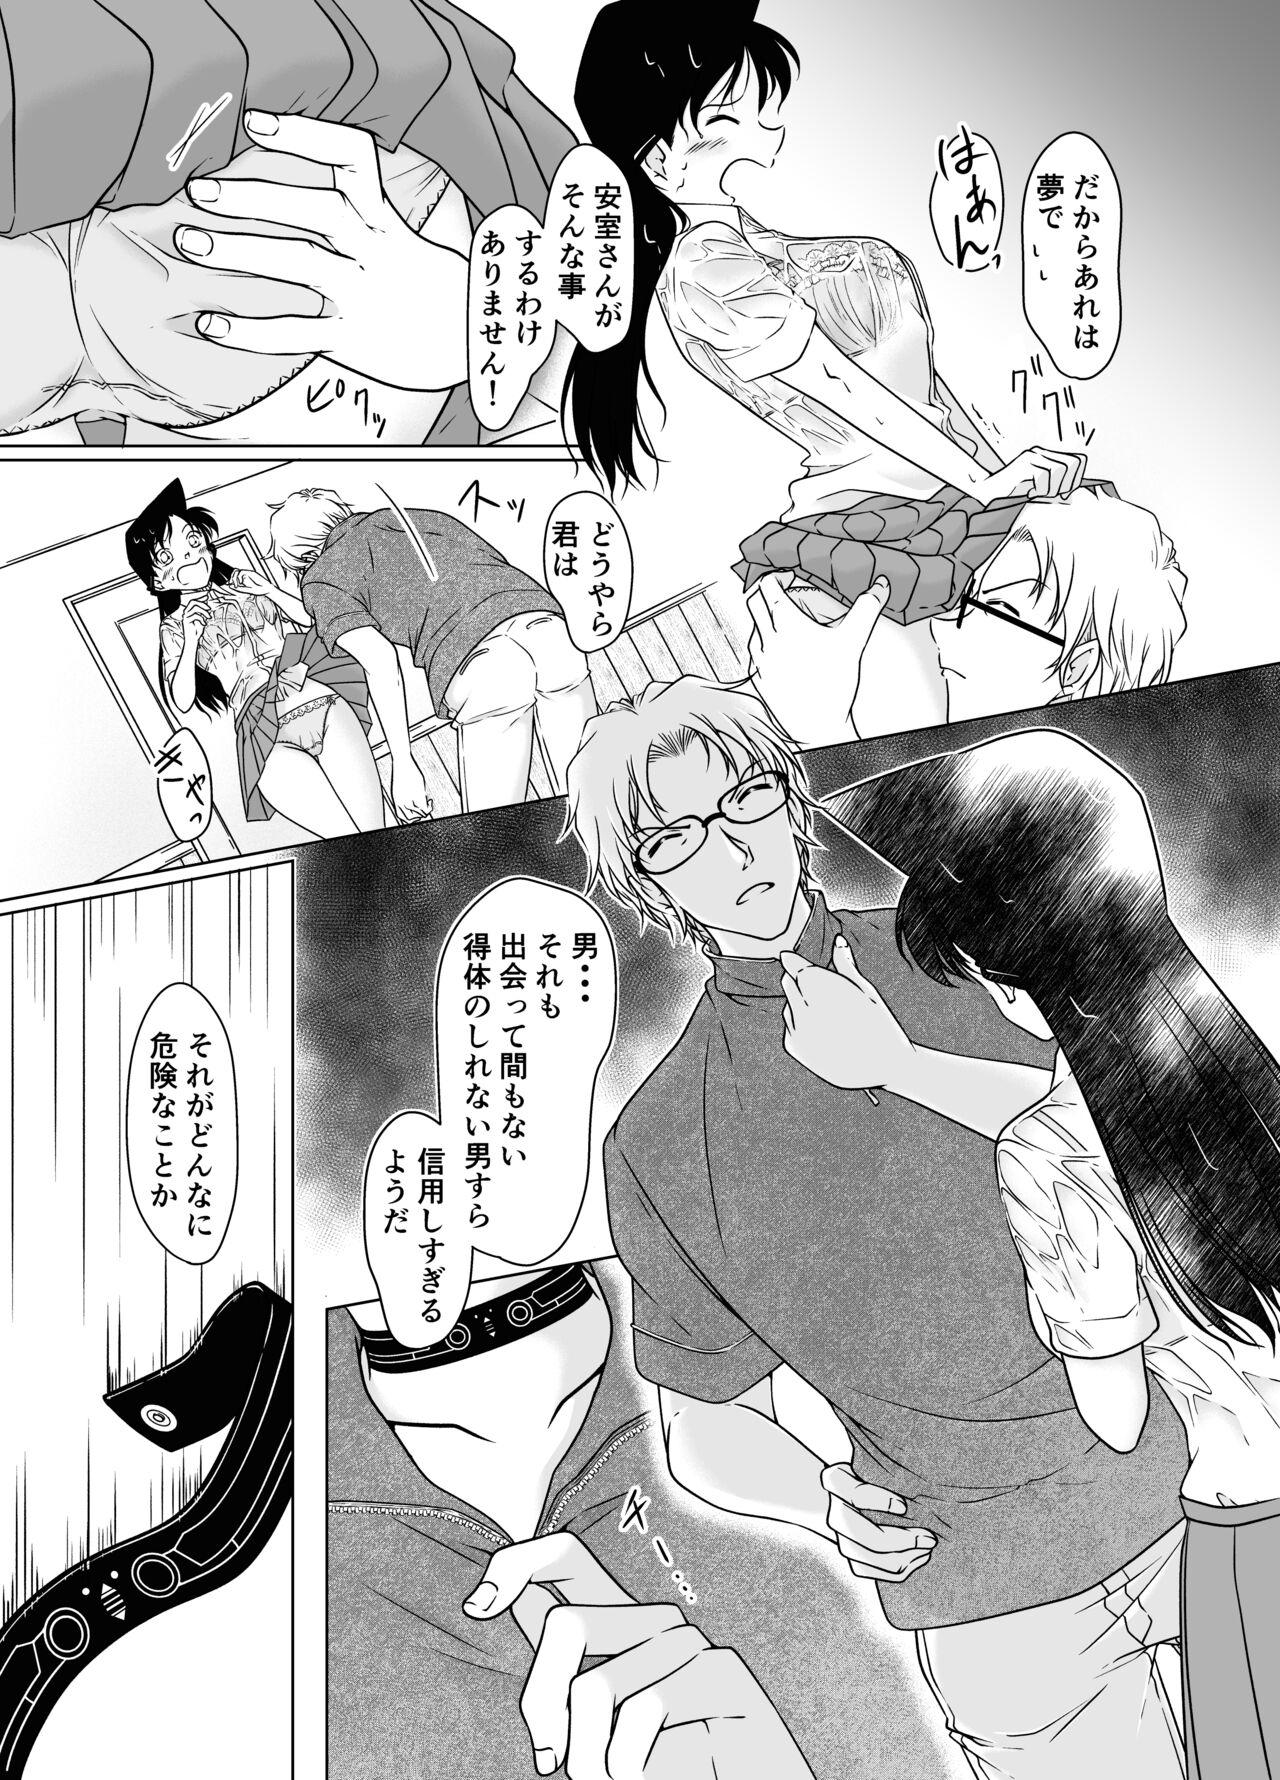 Gay 【Detective Conan】Something is wrong in the afternoon - Detective conan | meitantei conan Cheerleader - Page 10